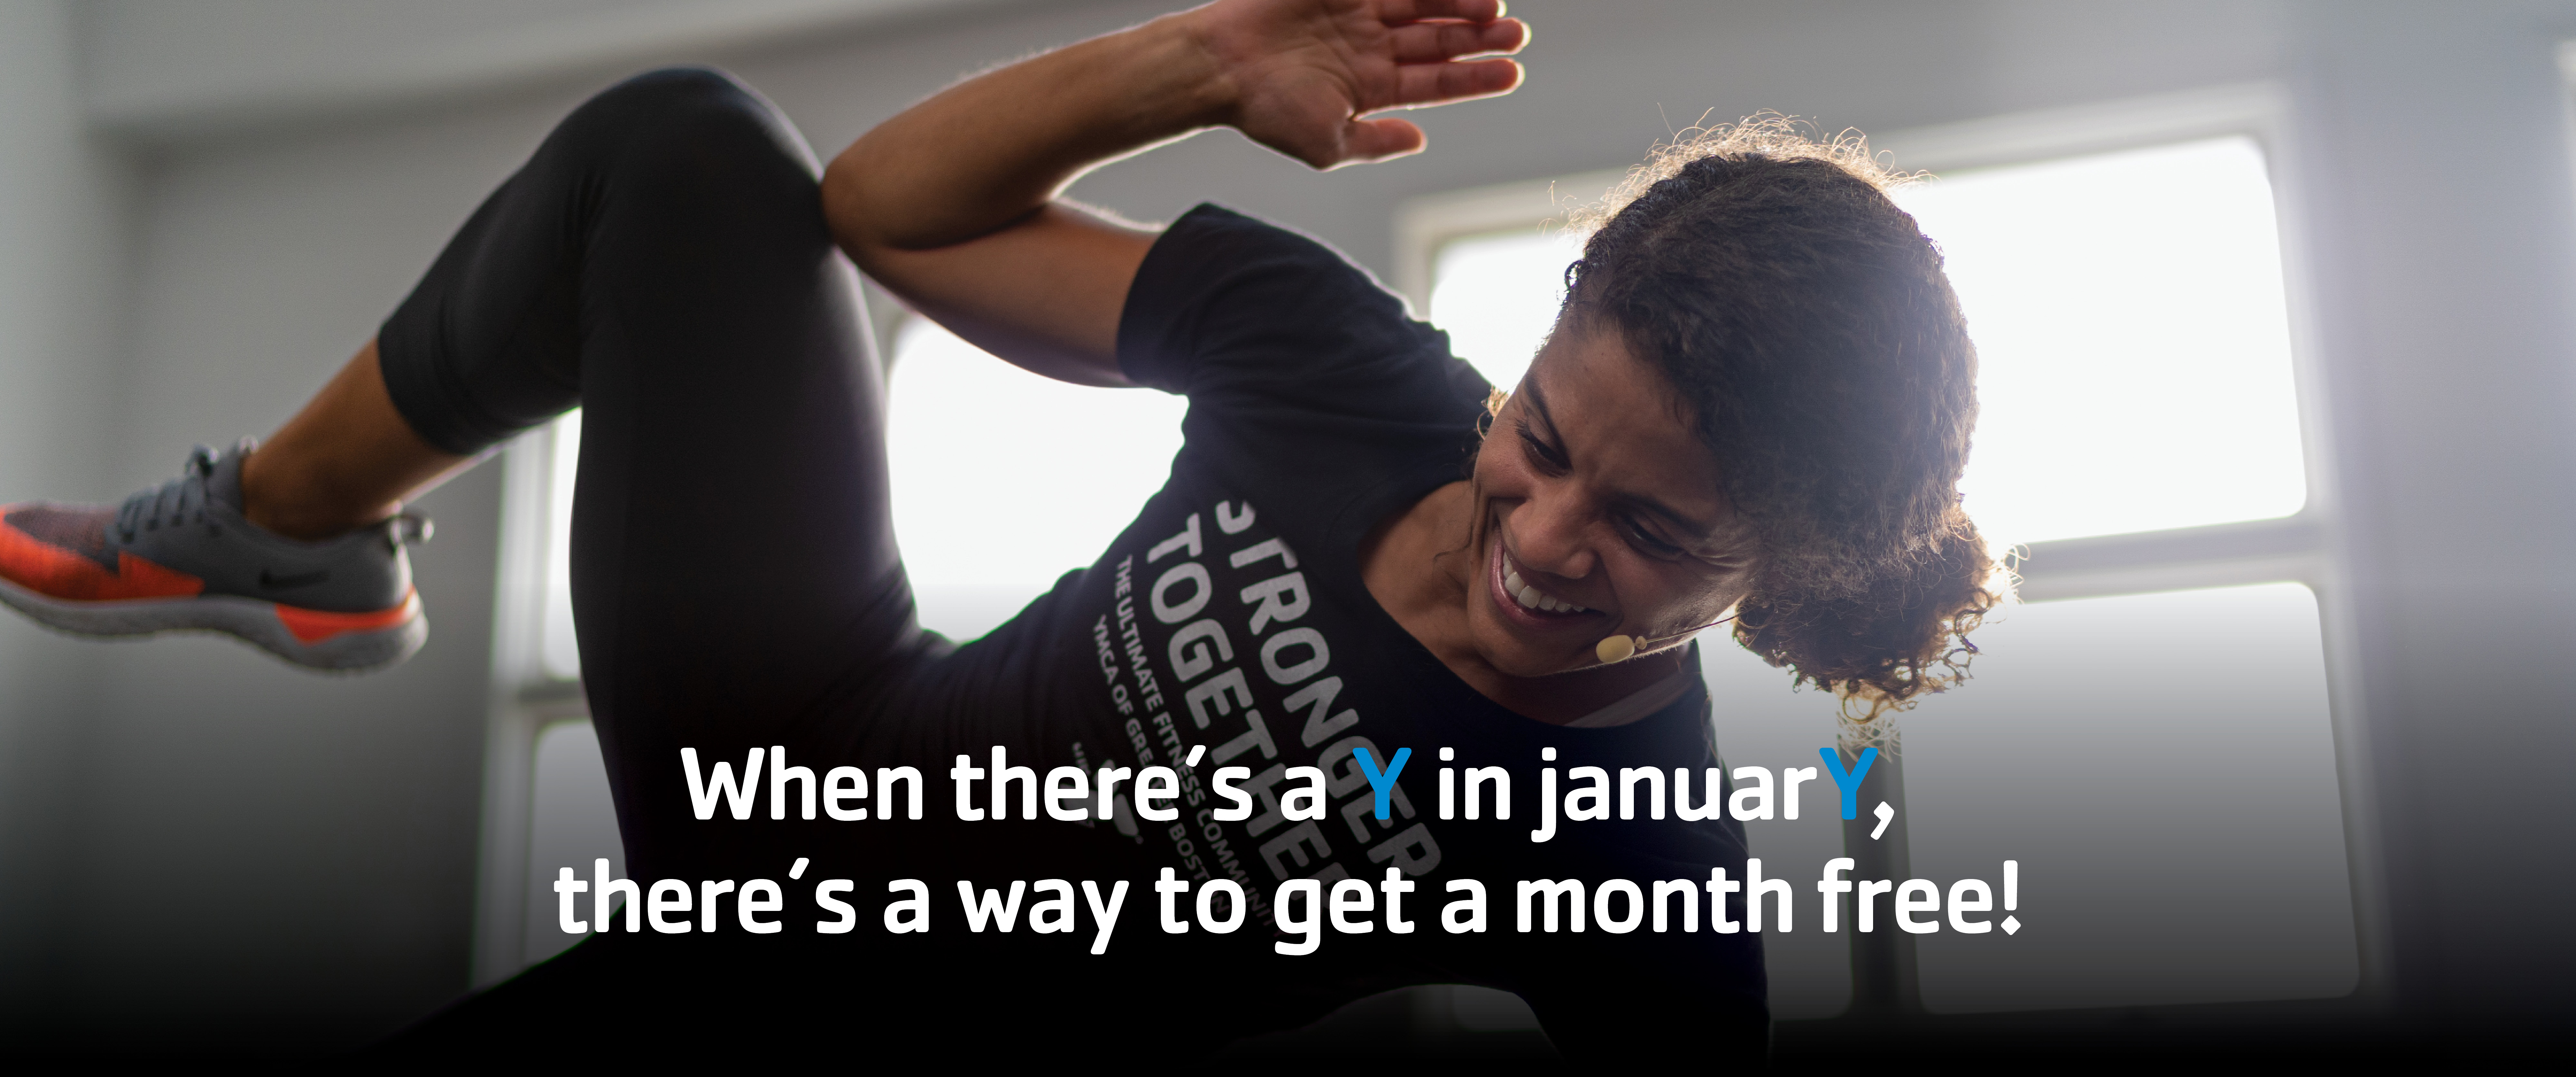 When there's a Y in January, there's a way to get a month free!